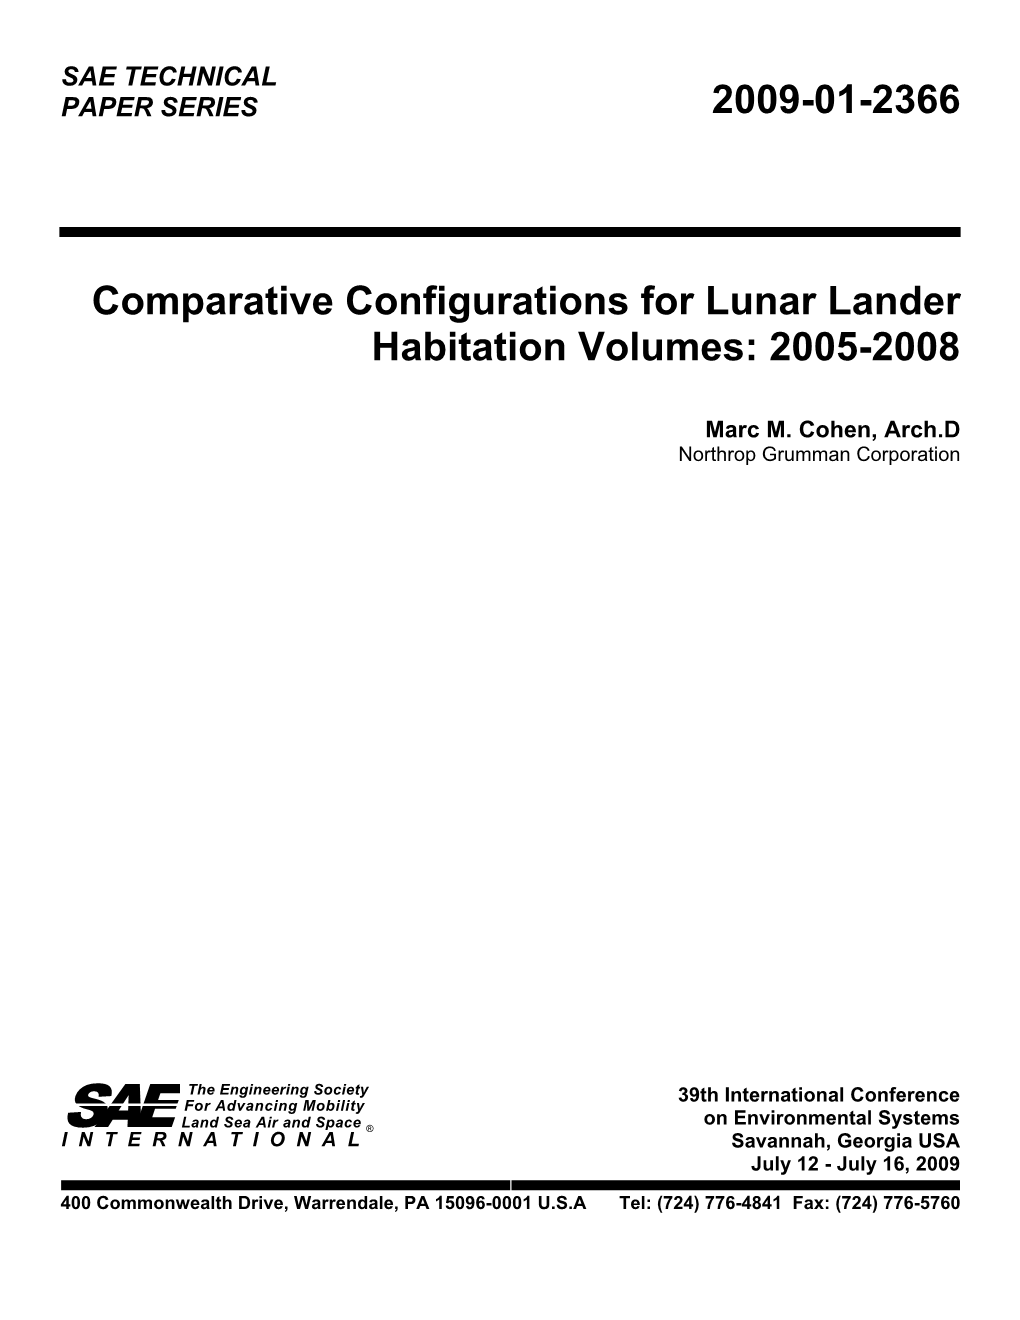 2009-01-2366 Comparative Configurations For